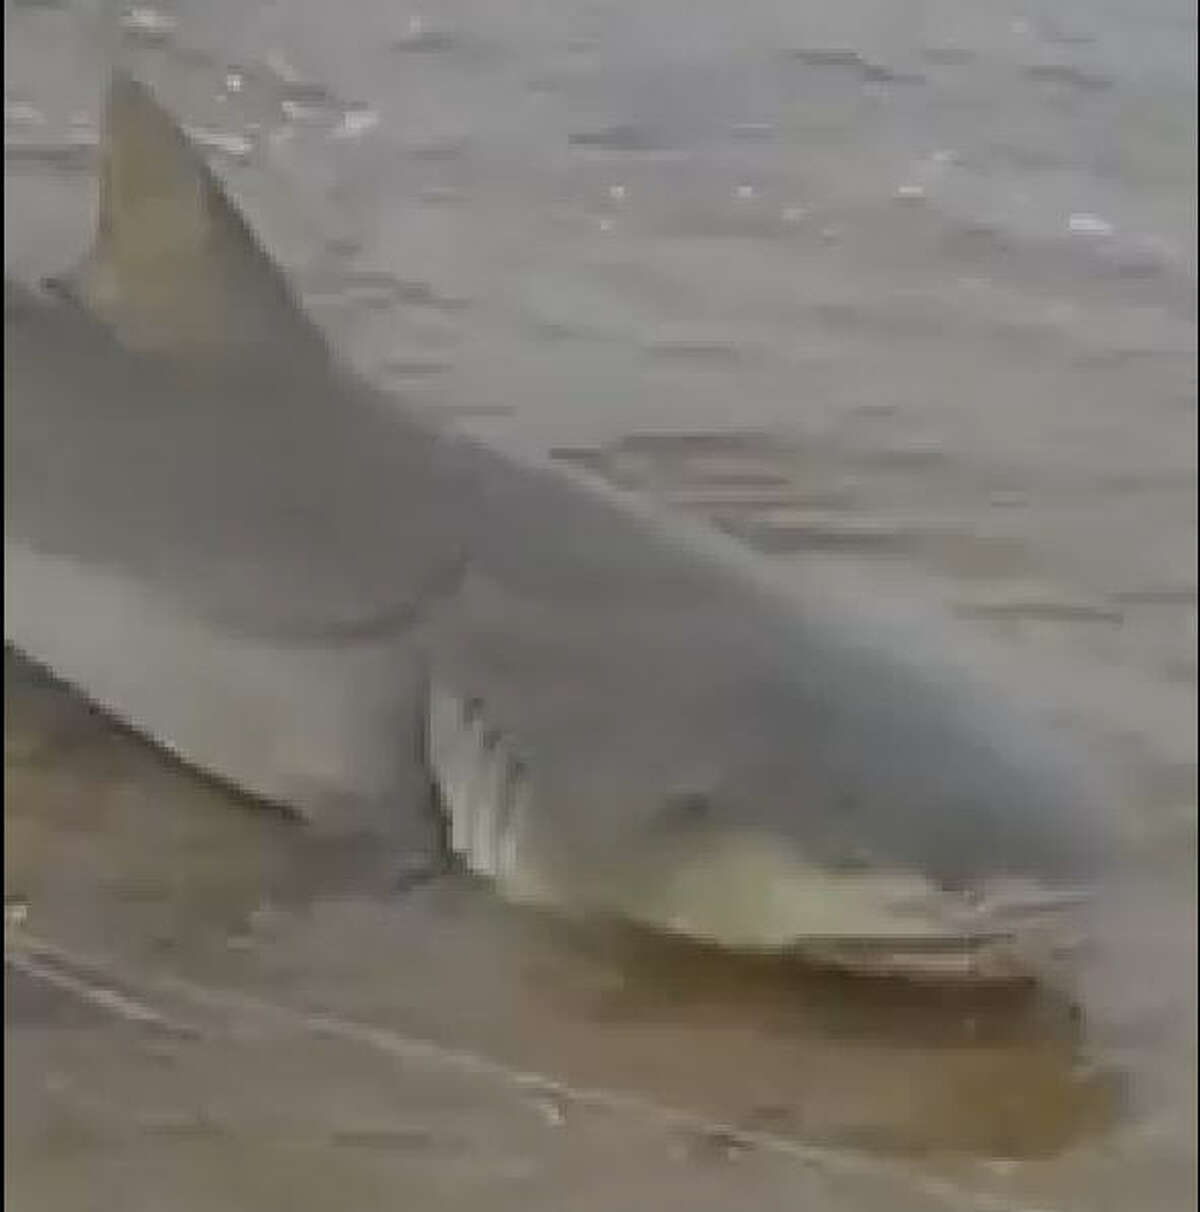 Fisherman Paul Lipinski, 50, from Cyrpess, unhooks the shark and drags it back out into the Gulf in a video posted on Facebook and located at Galveston Beach.